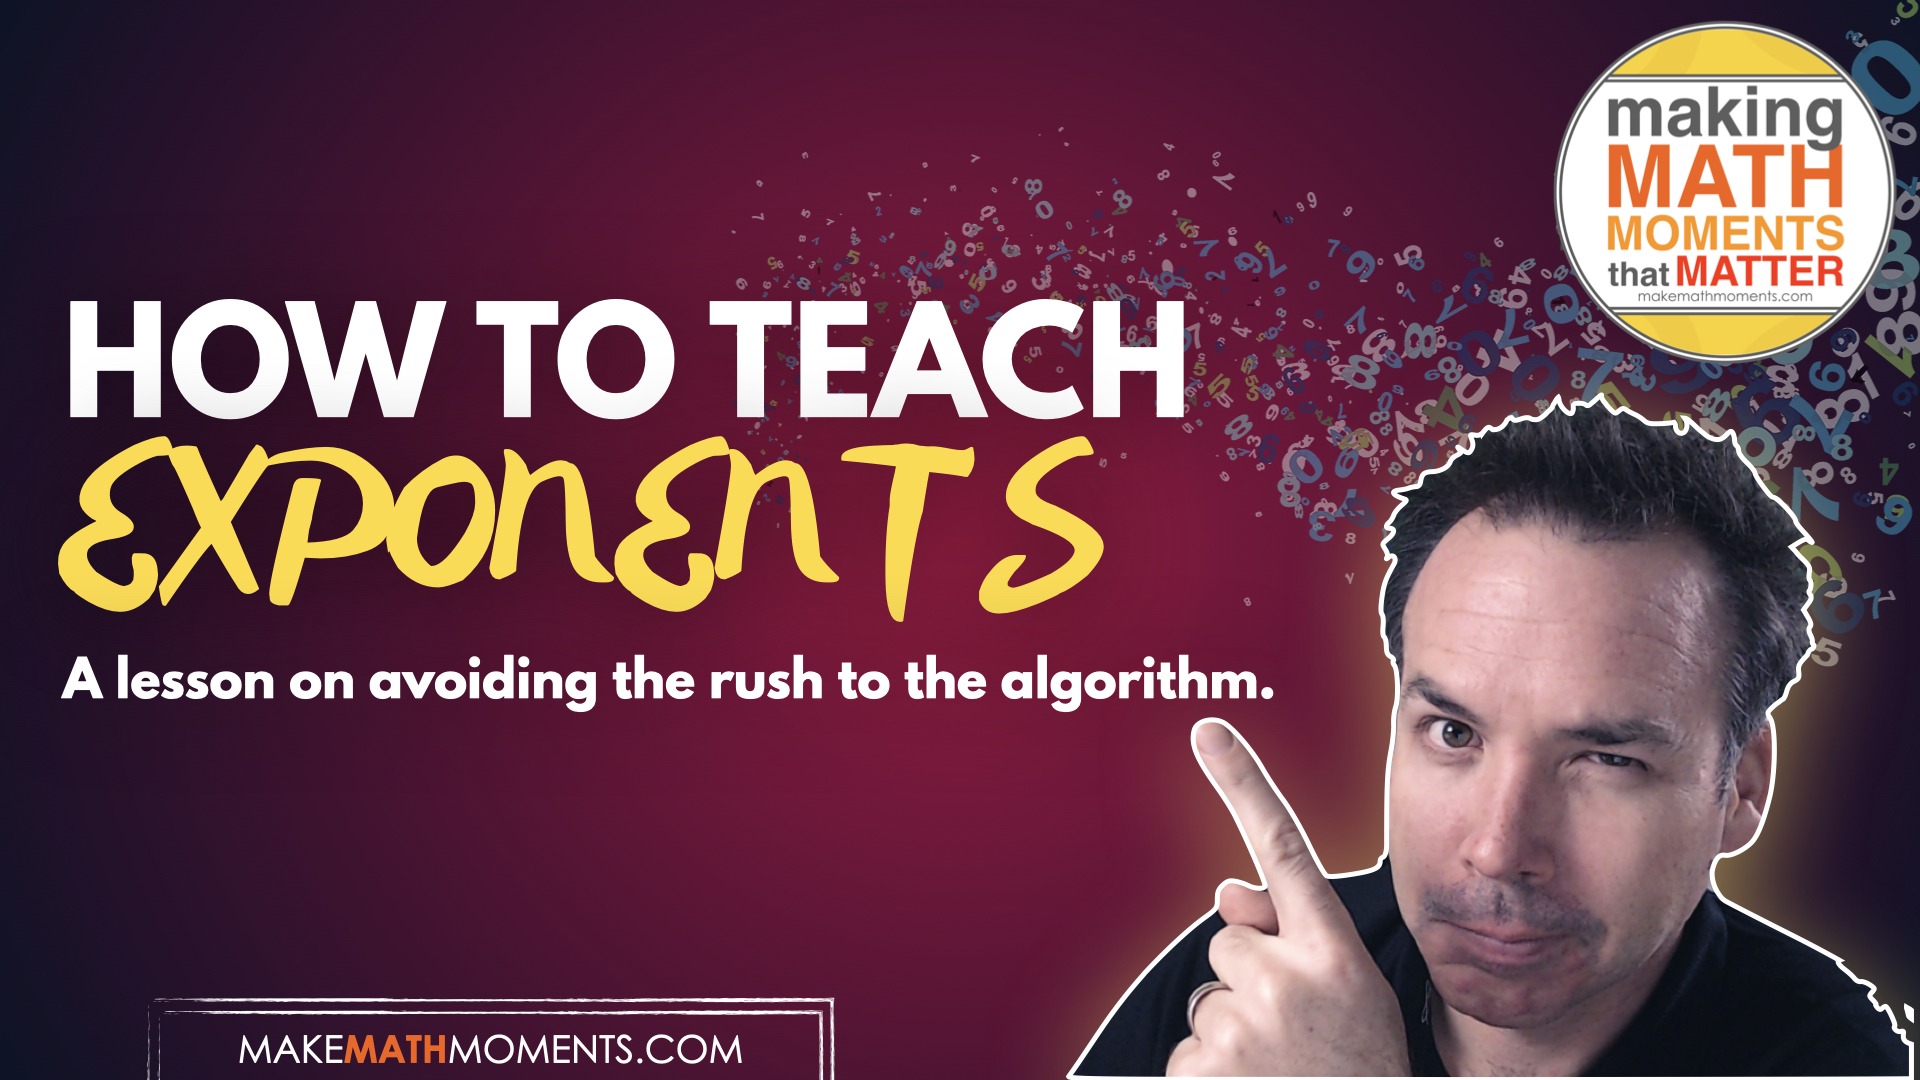 How To Teach Exponents: Avoiding a Common Misconception When Teaching Through Problems